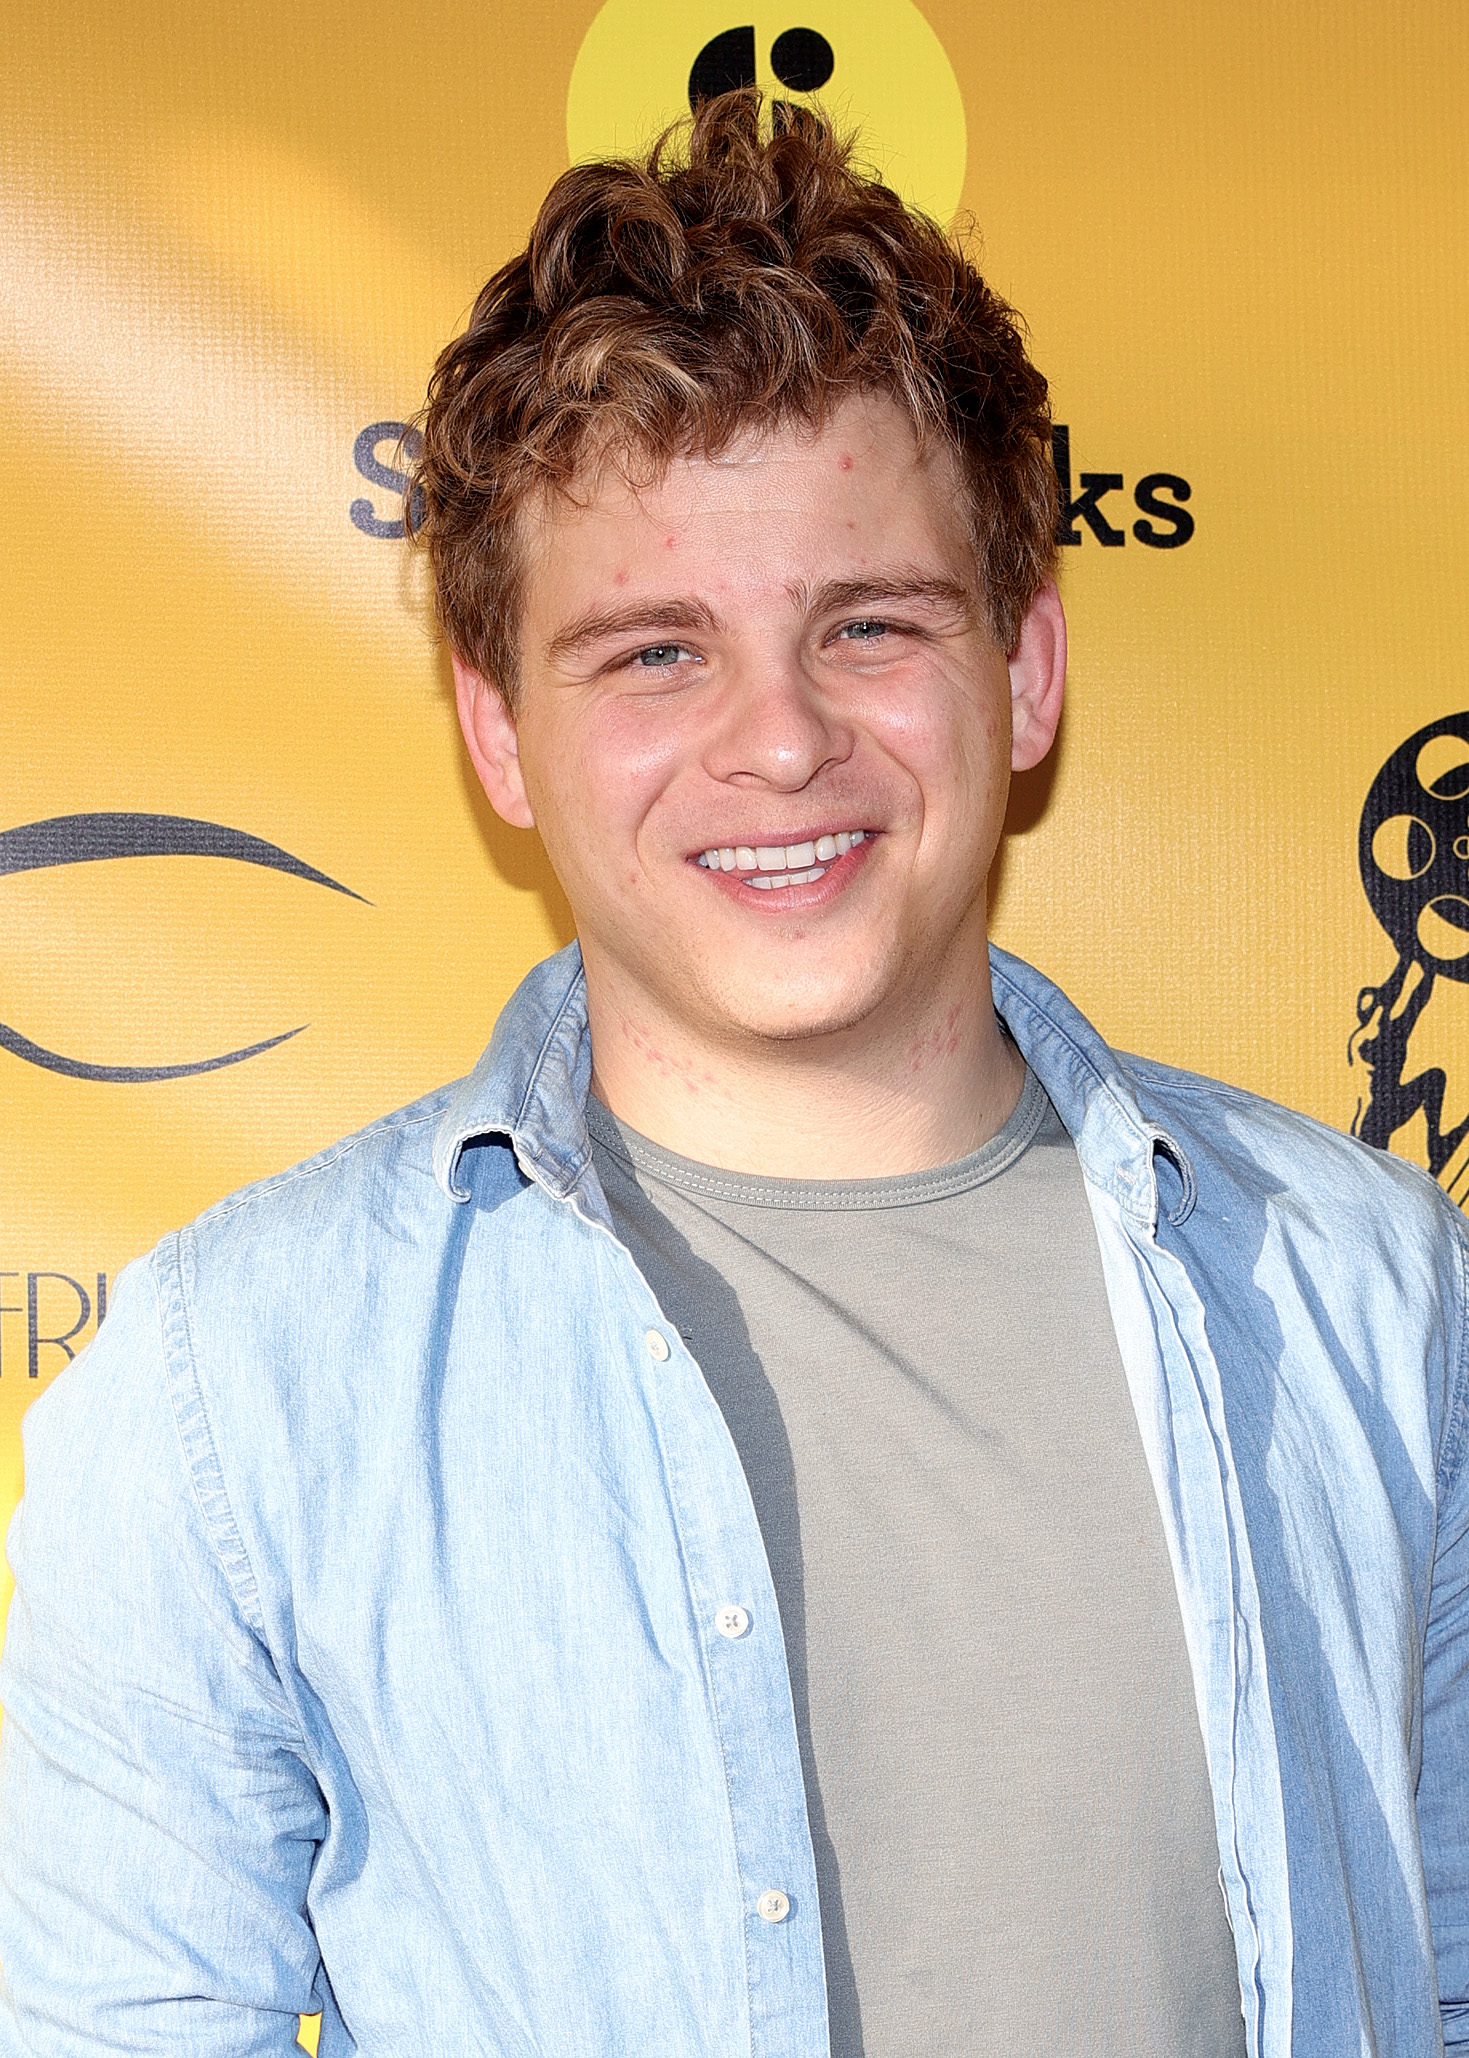 Jonathan Lipnicki in Tustin, California on April 10, 2021 | Source: Getty Images